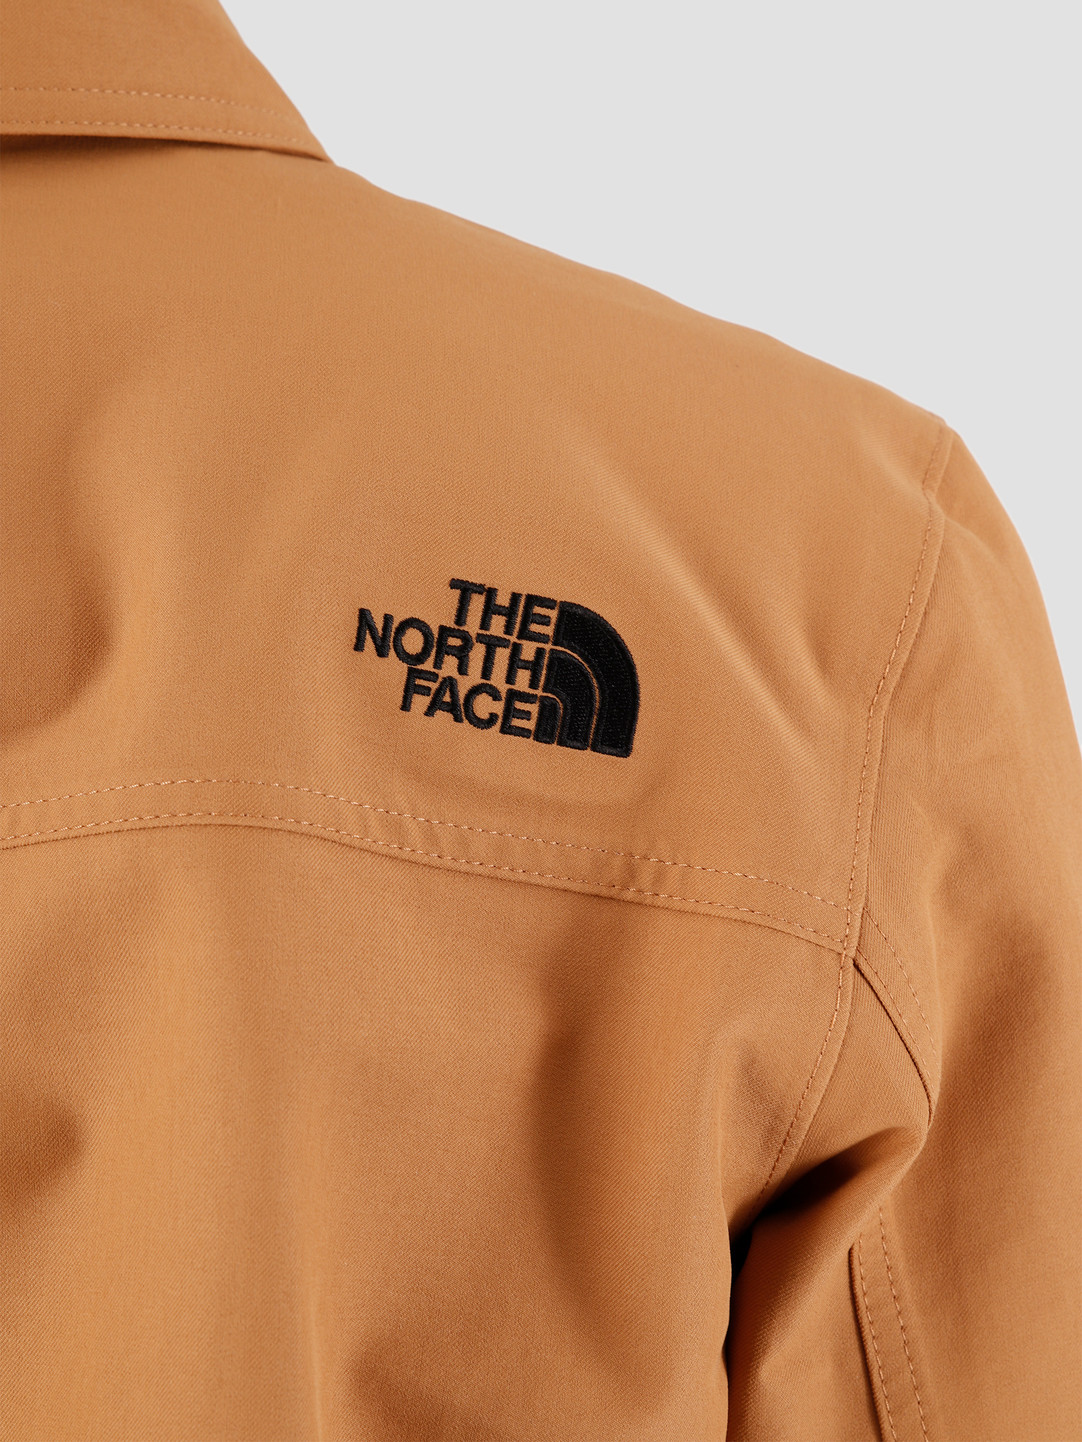 the north face brown jacket